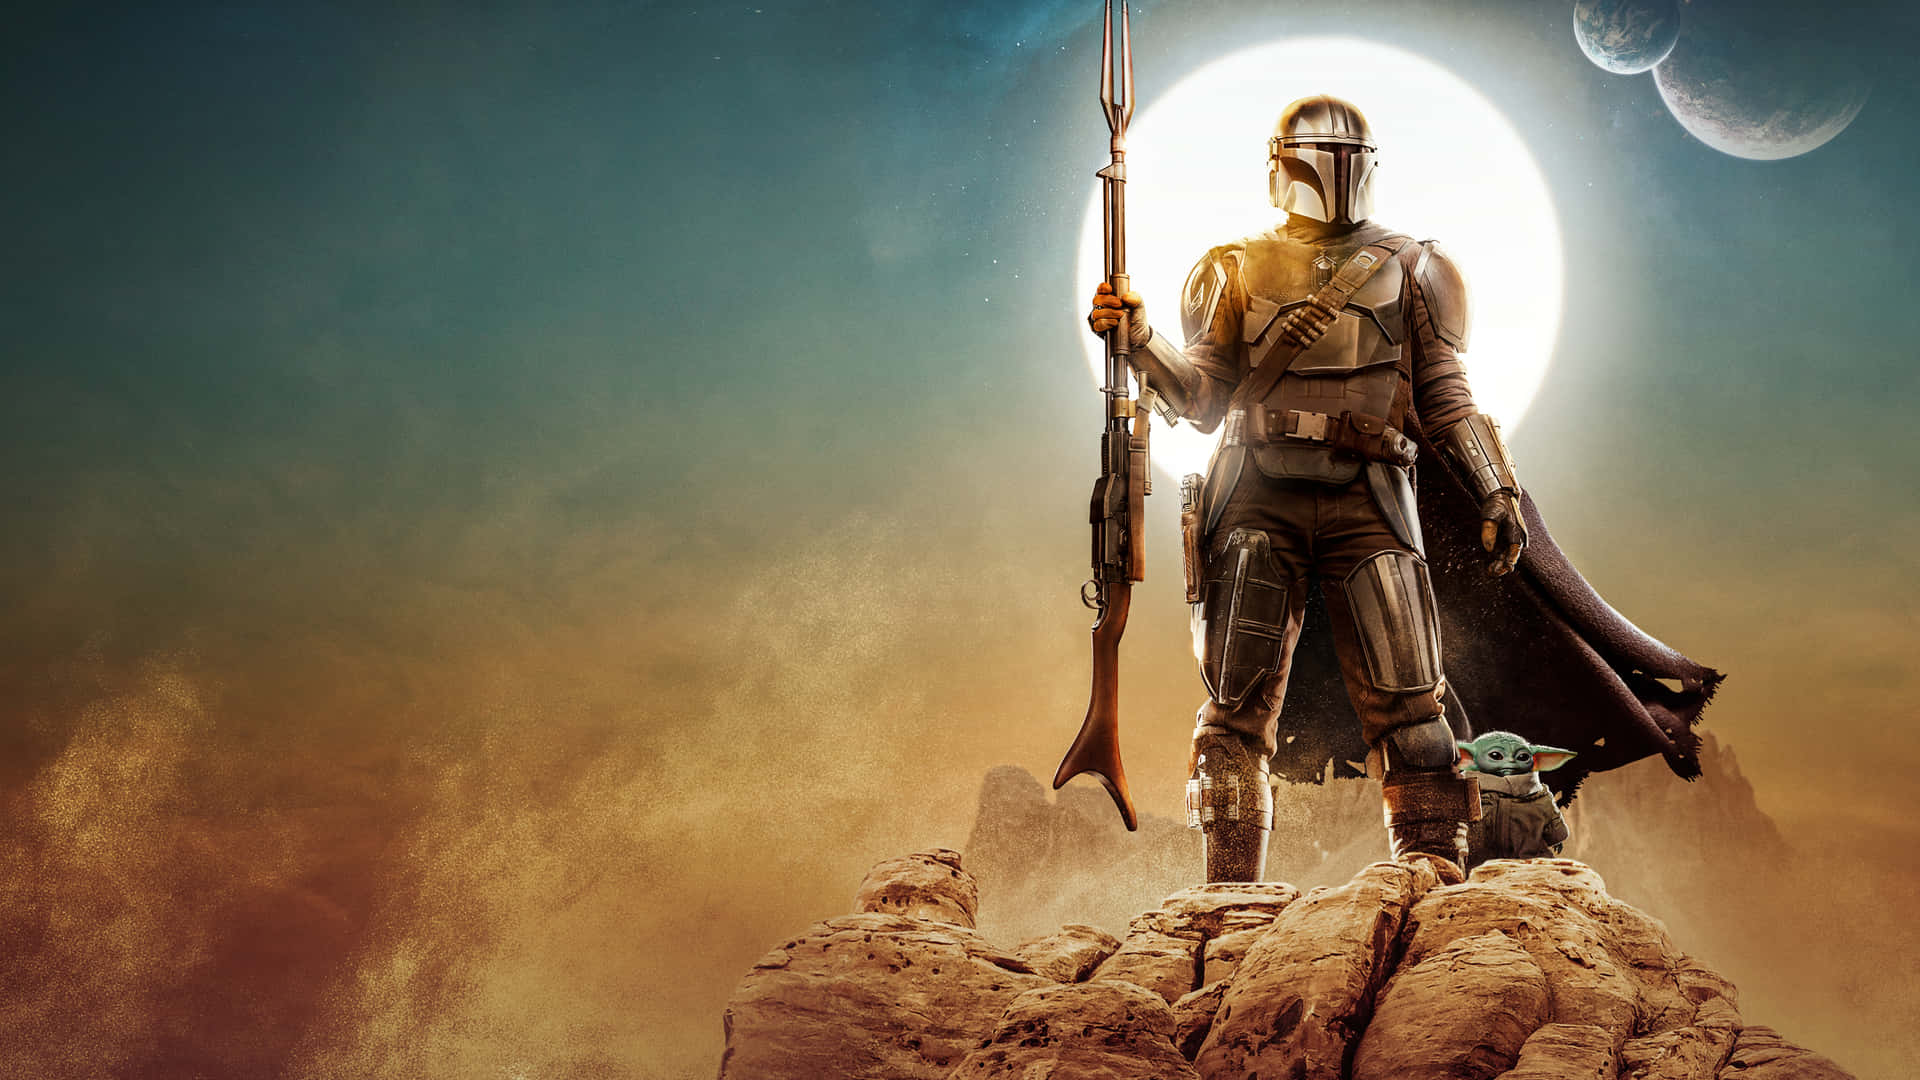 The Mandalorian Standing Tall: A Lone Defender Against The Dark Skies